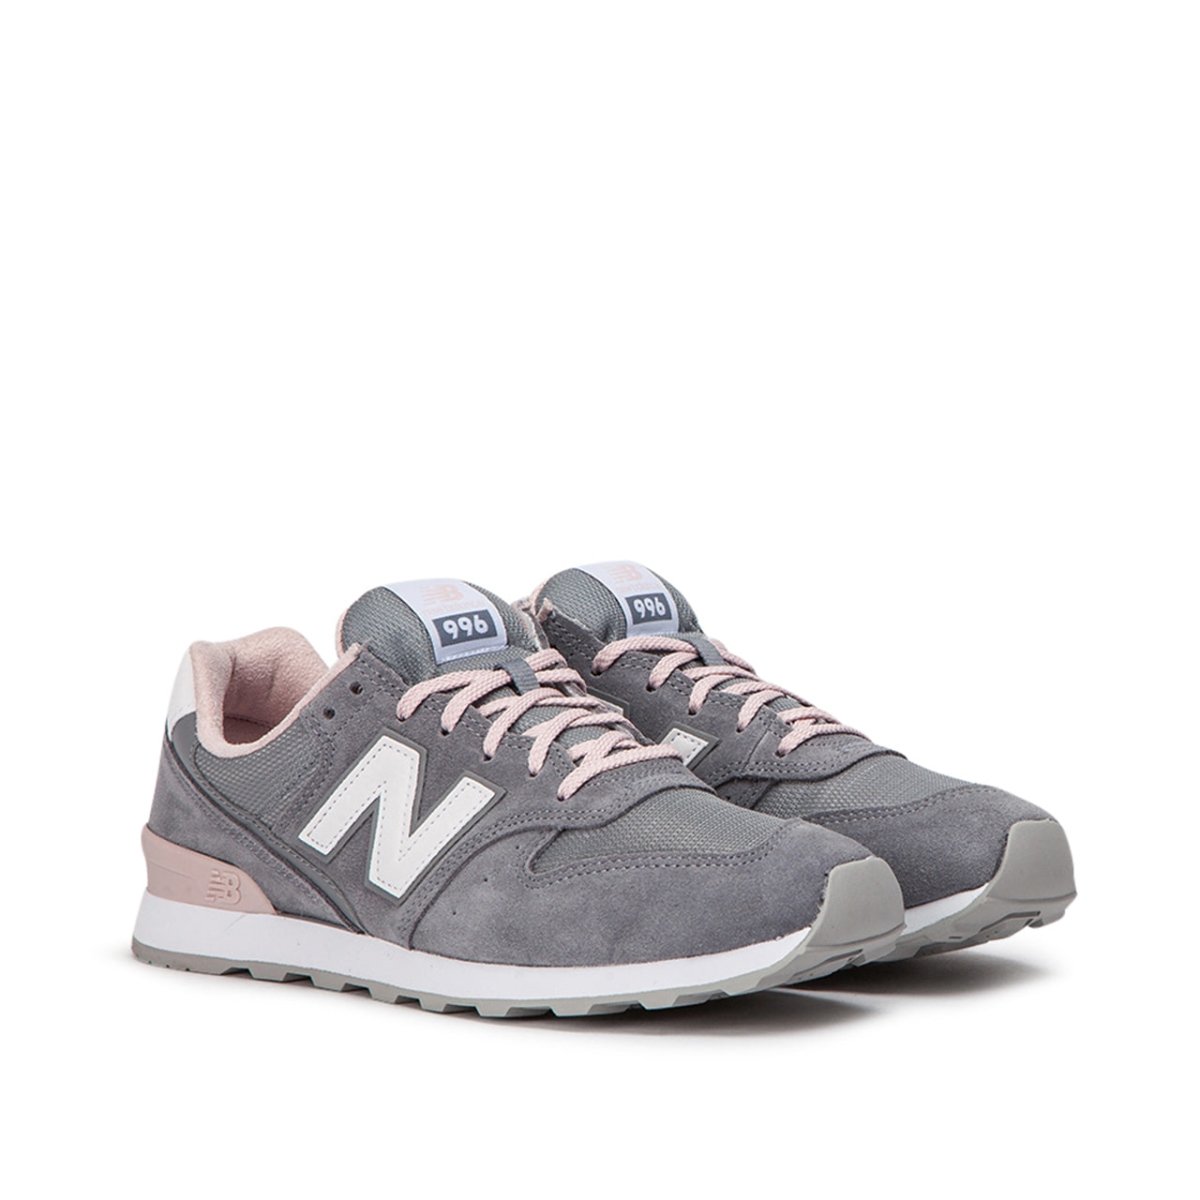 Celo Modales probable New Balance WR996 ACG (Grey) 678581-50-12 – Allike Store